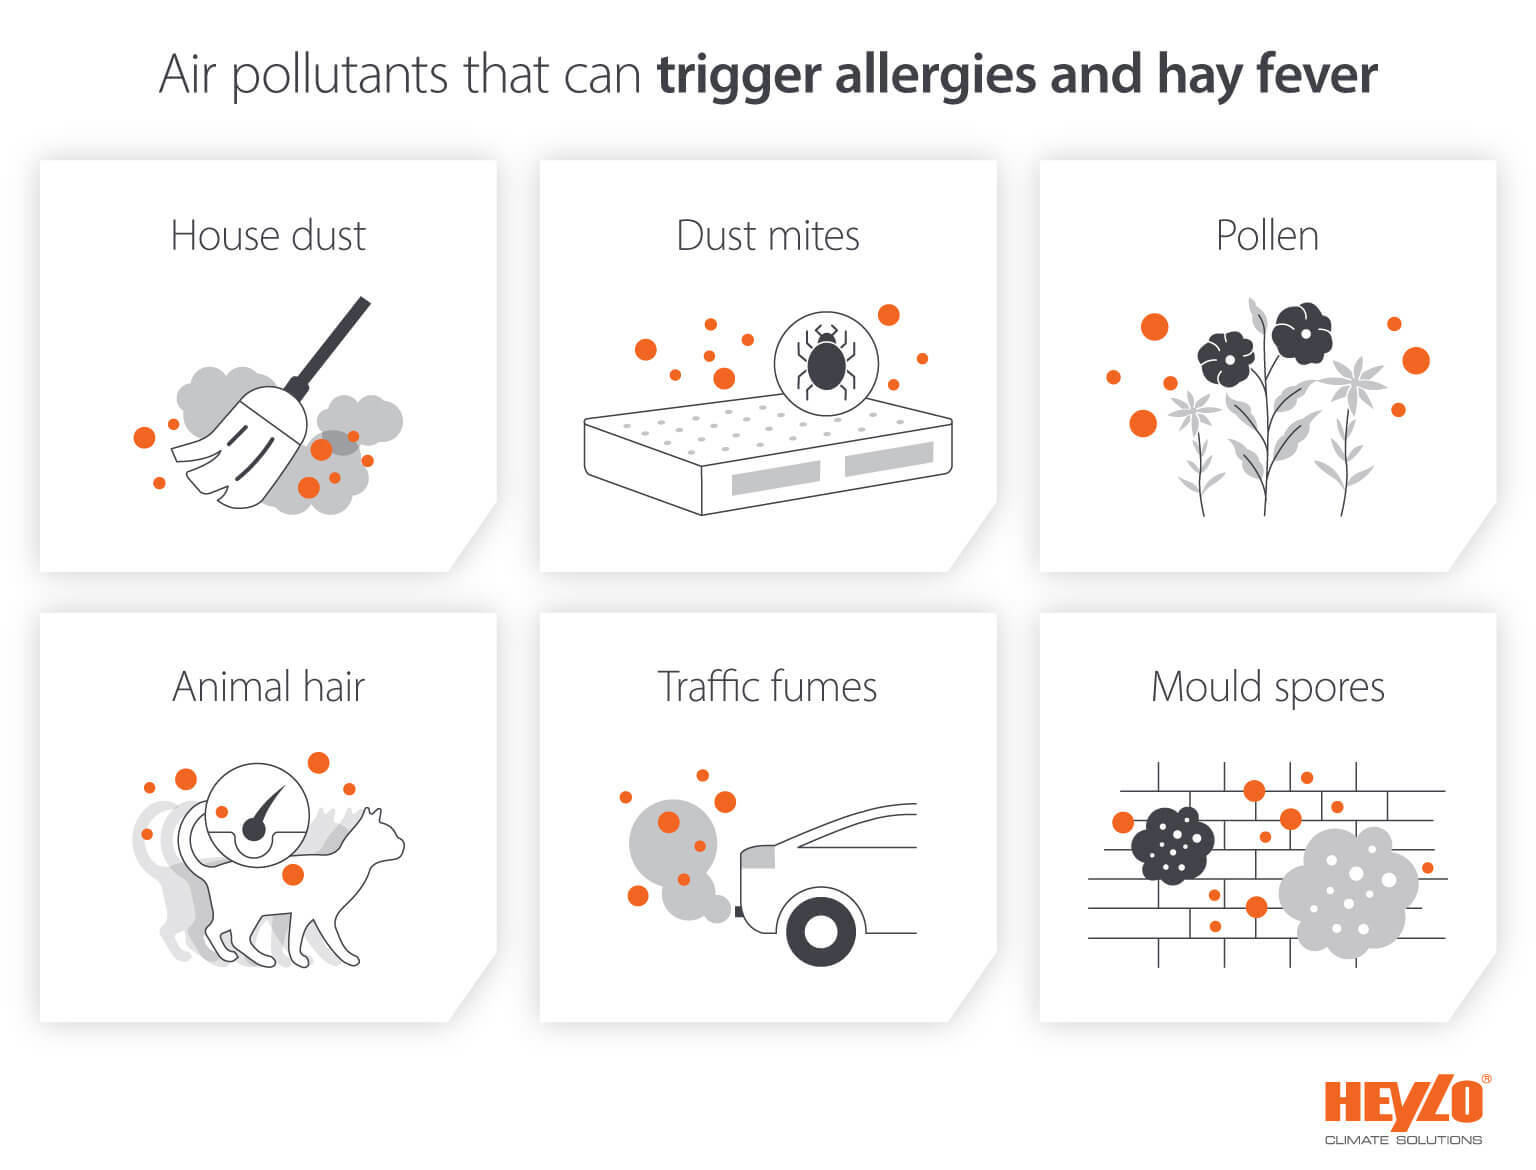 Air pollutants that can trigger allergies and hayfever like dust, mites, mould spores, animal hair and fumes - Infographic image